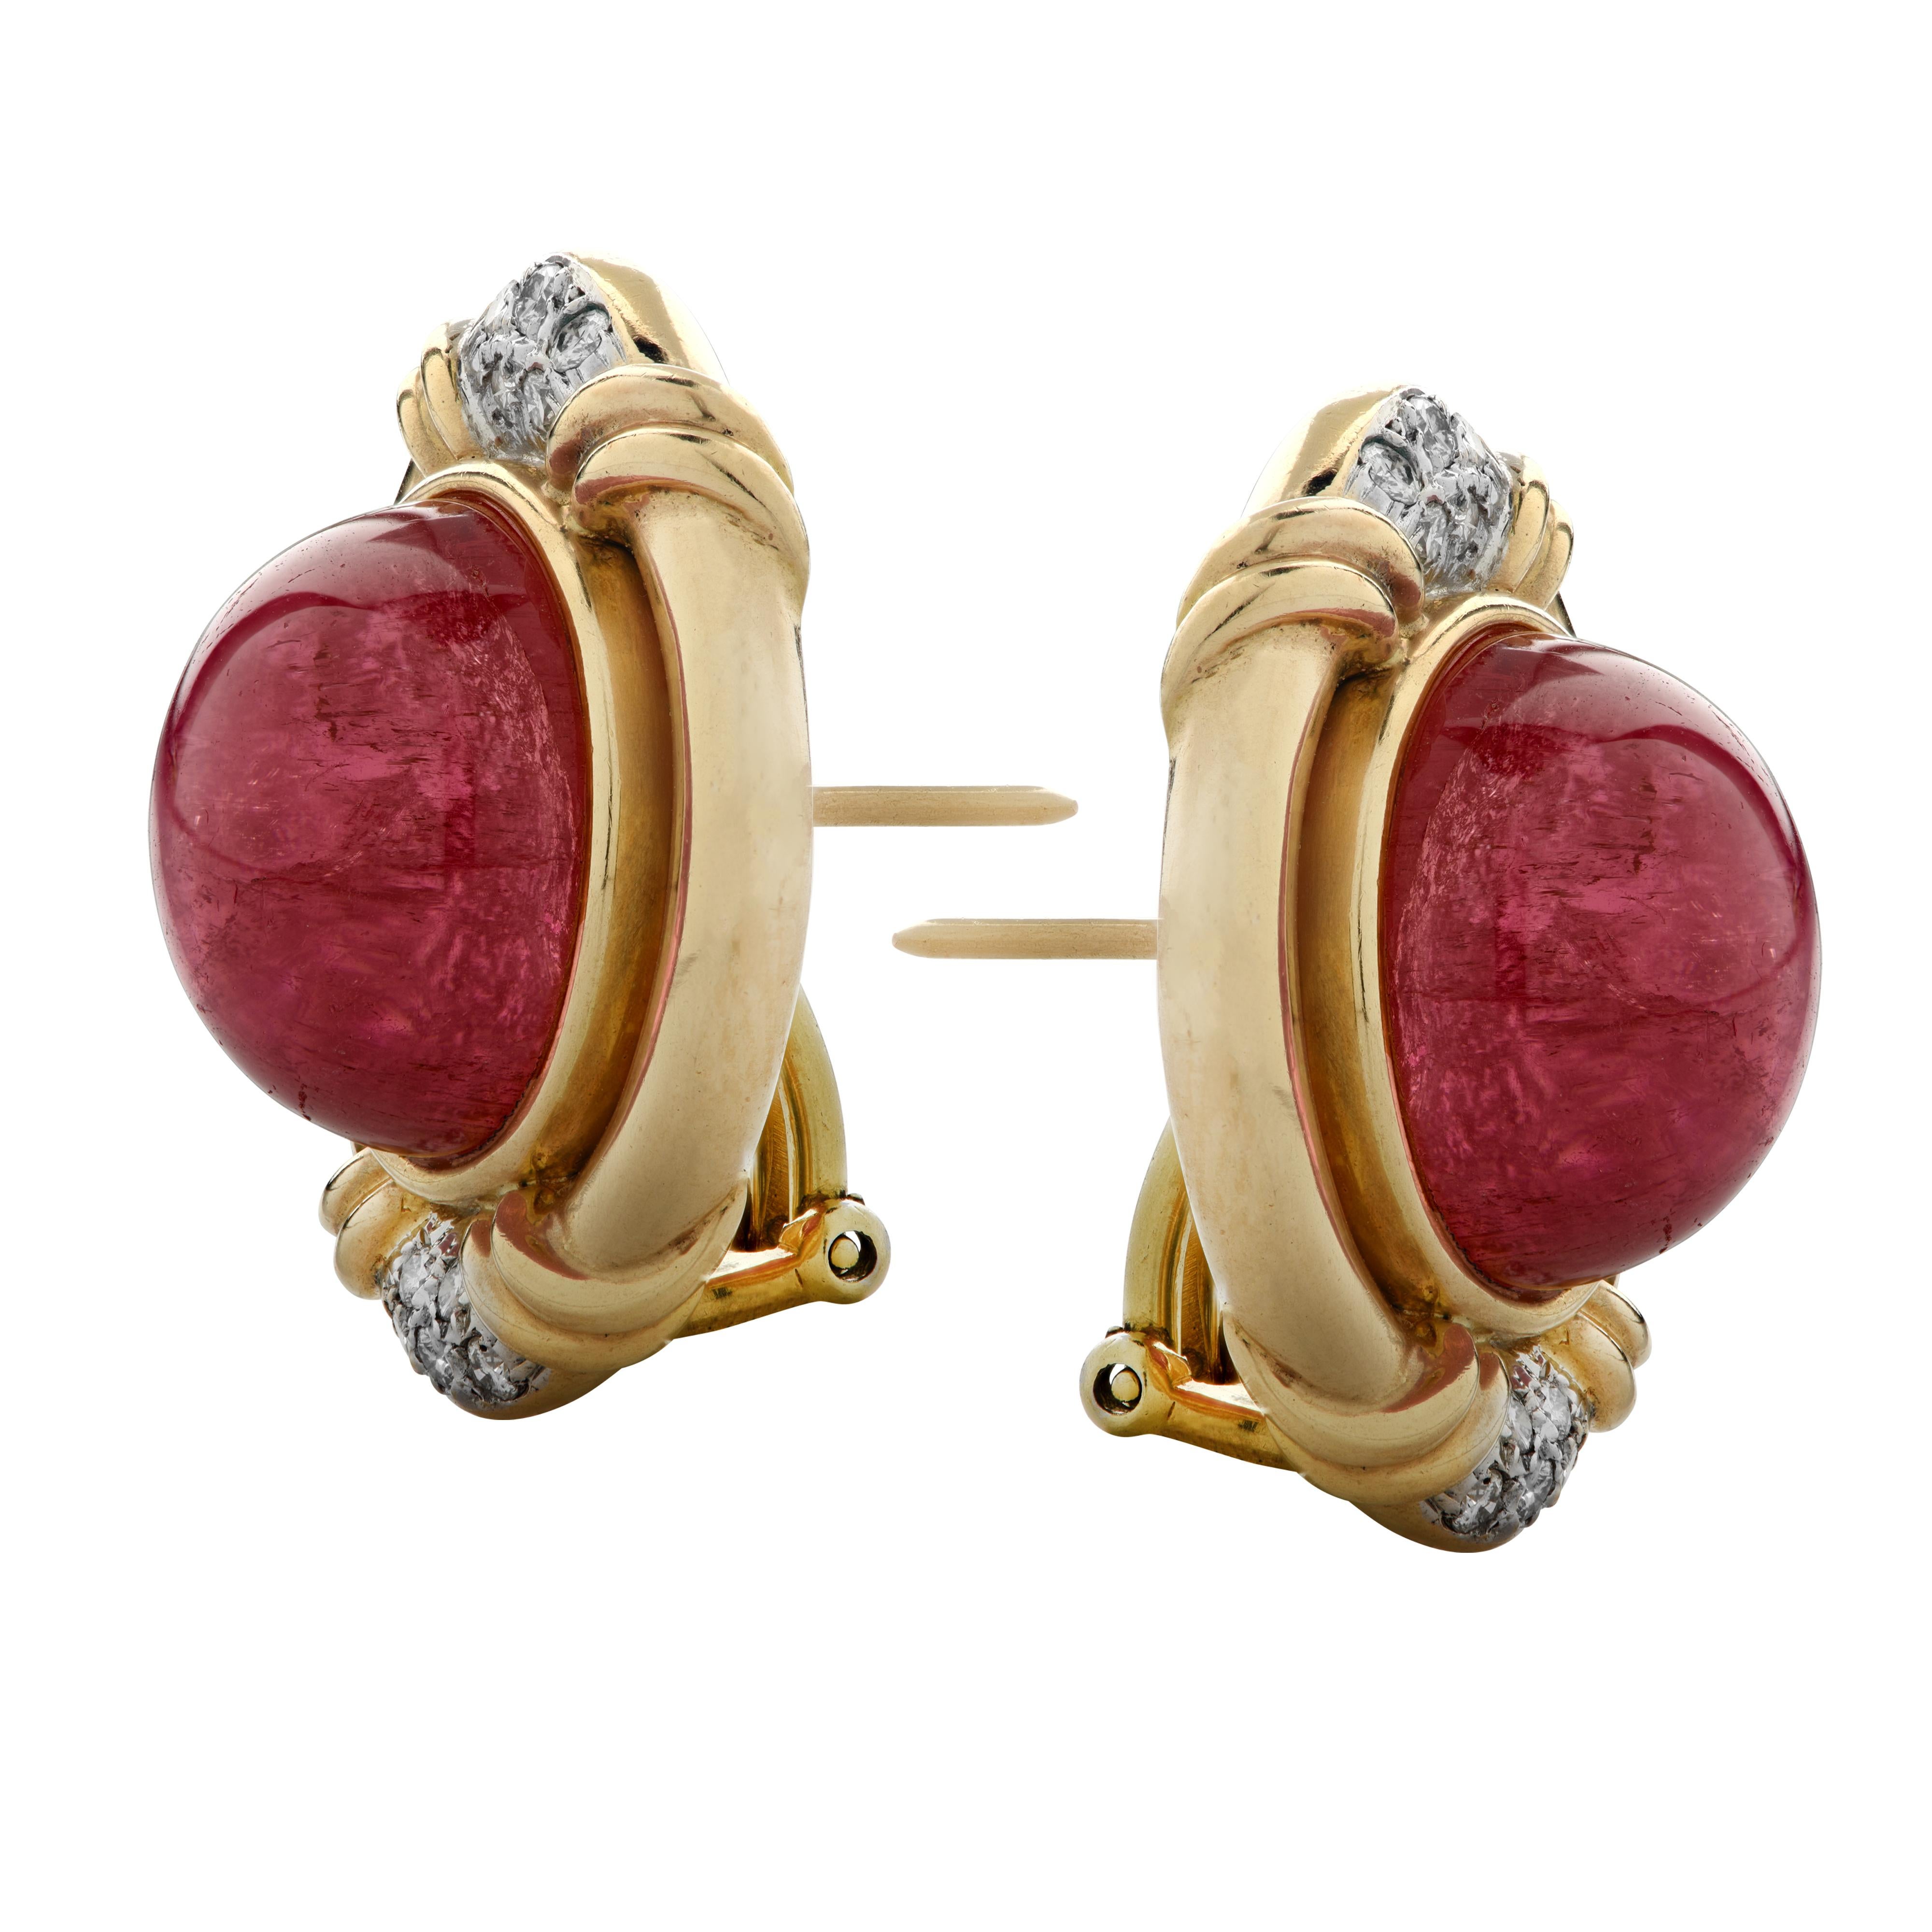 Beautiful earrings crafted in yellow and white gold showcasing two round rubellite tourmaline cabochons measuring .5 of an inch in diameter framed in yellow gold adorned with 20 round brilliant cut diamonds weighing approximately .3 carats total, G